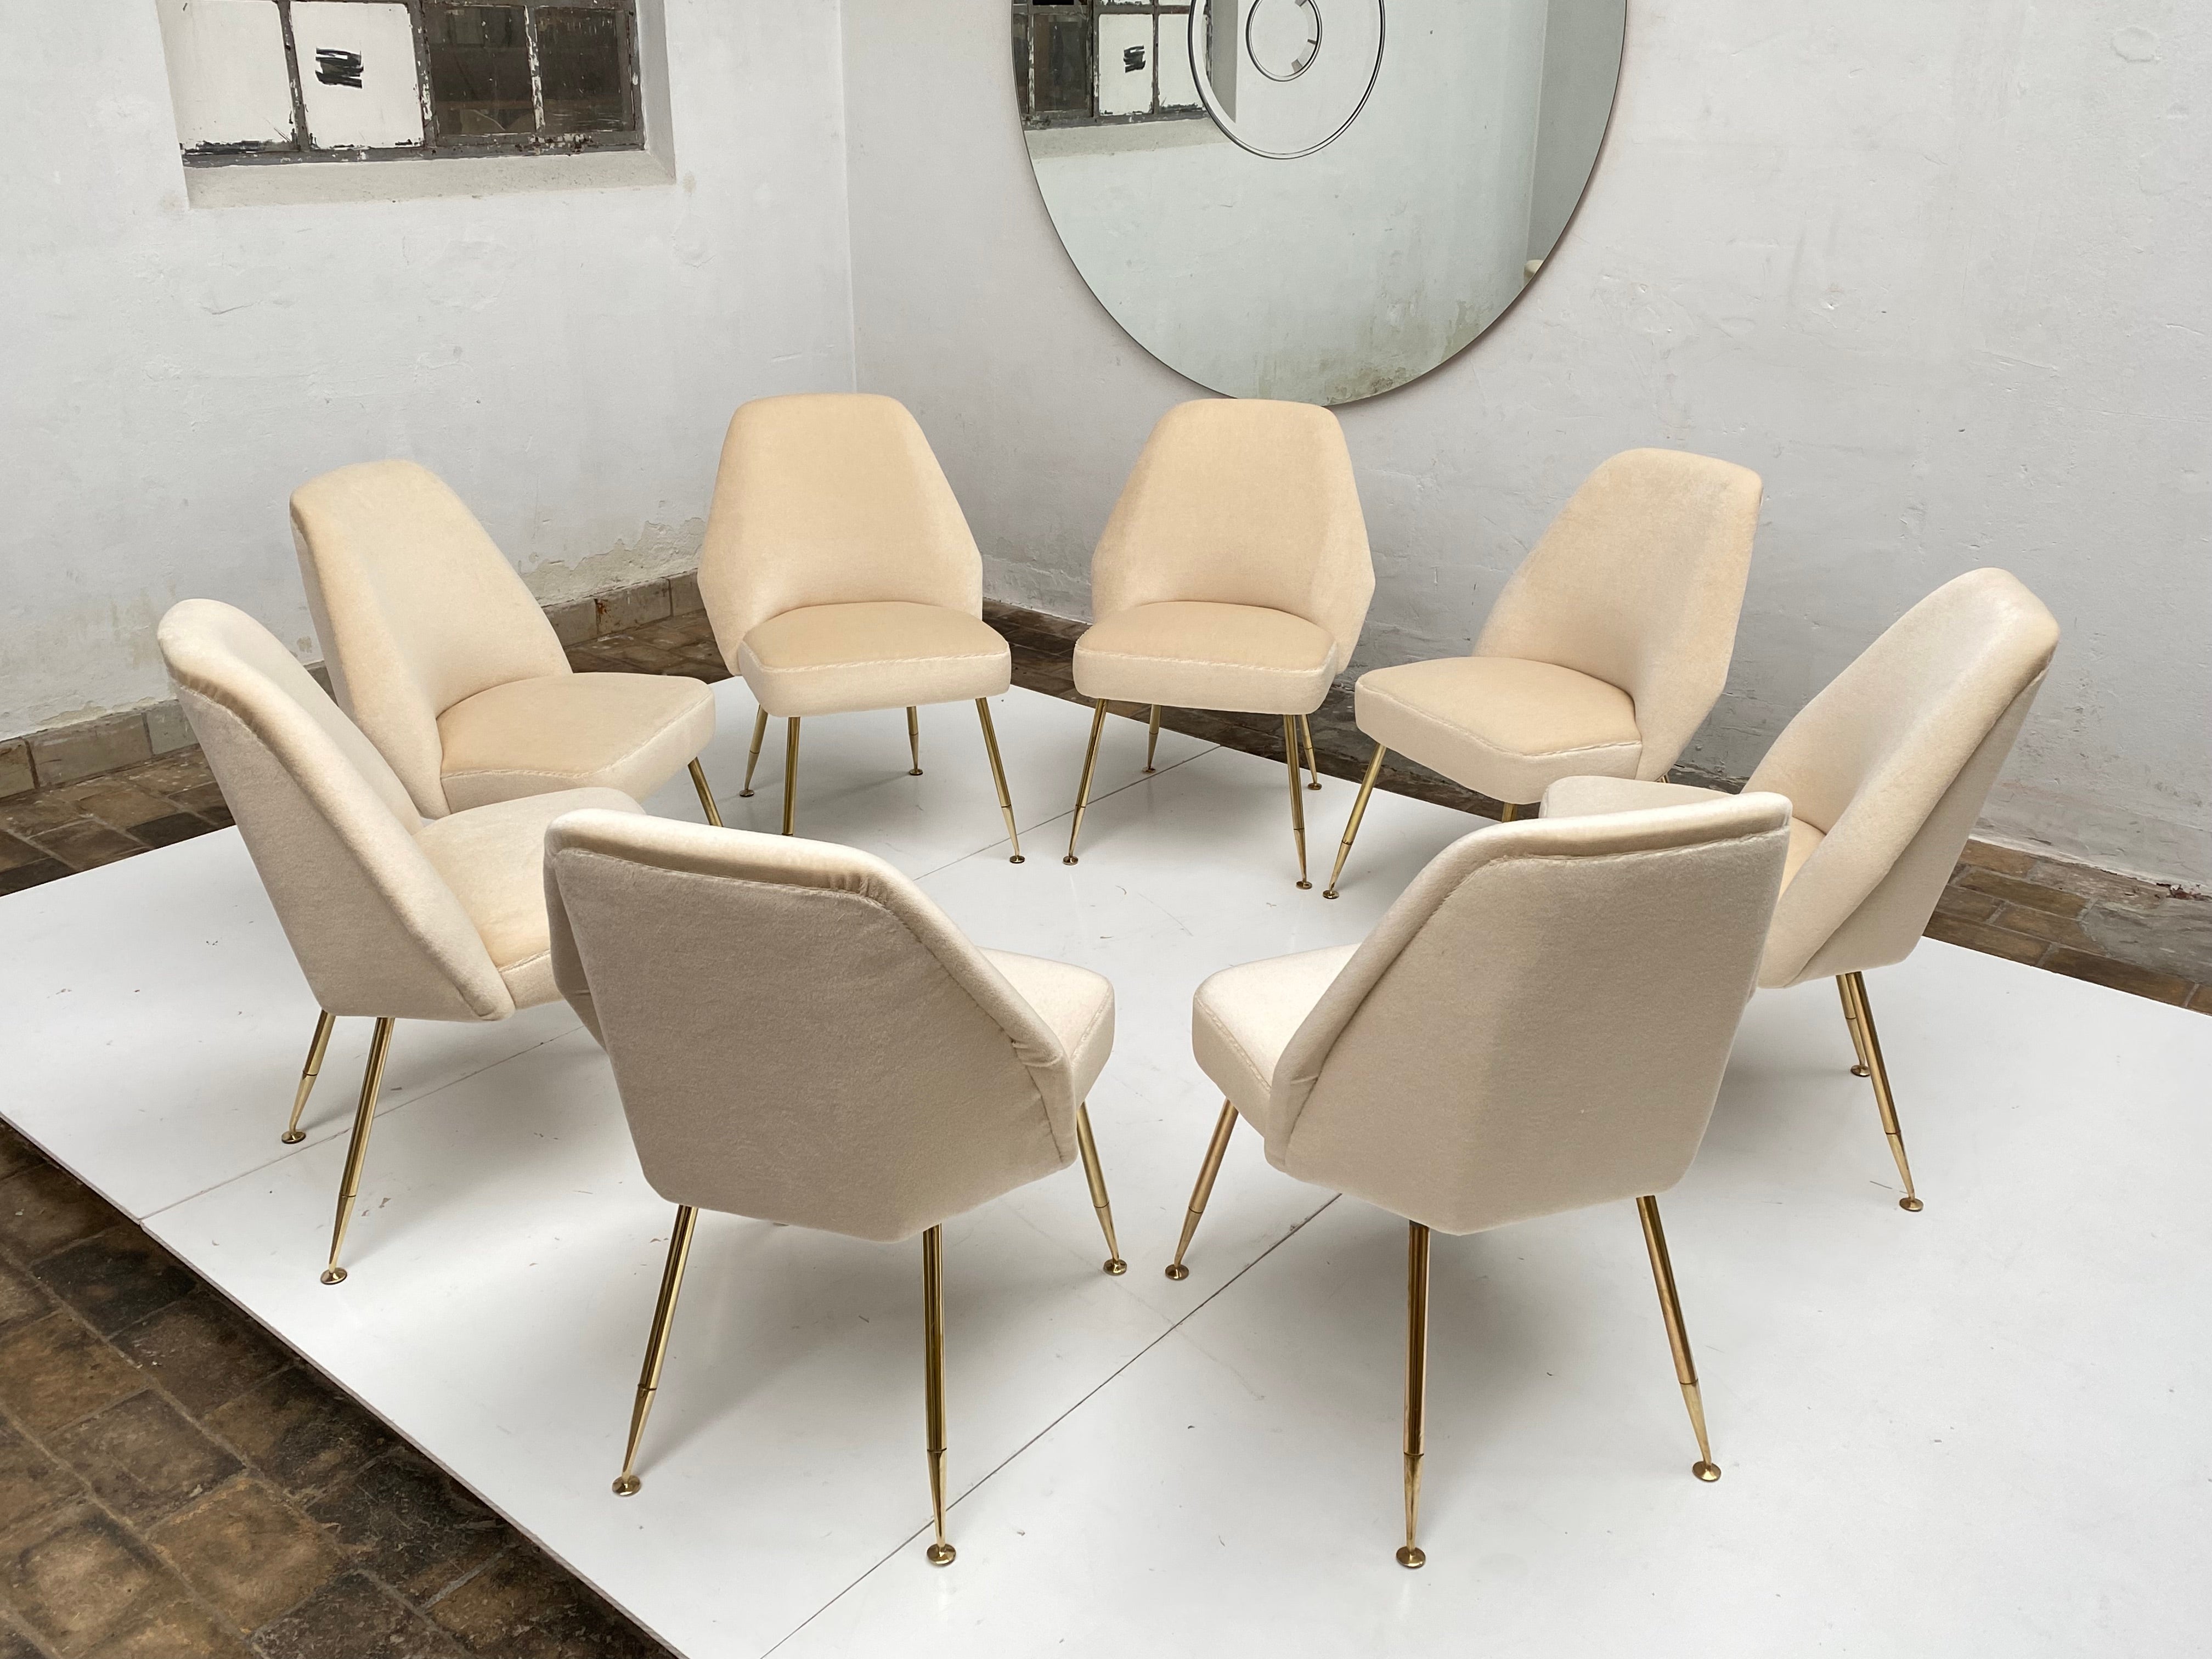 Amazing set of eight restored 'Campanula' dining chairs designed by Italian architect Carlo Pagani (architectural partner of both Gio Ponti and Lina Bo Bardi) for Arflex, Italy in 1952. These chairs have had their upholstery completely restored and